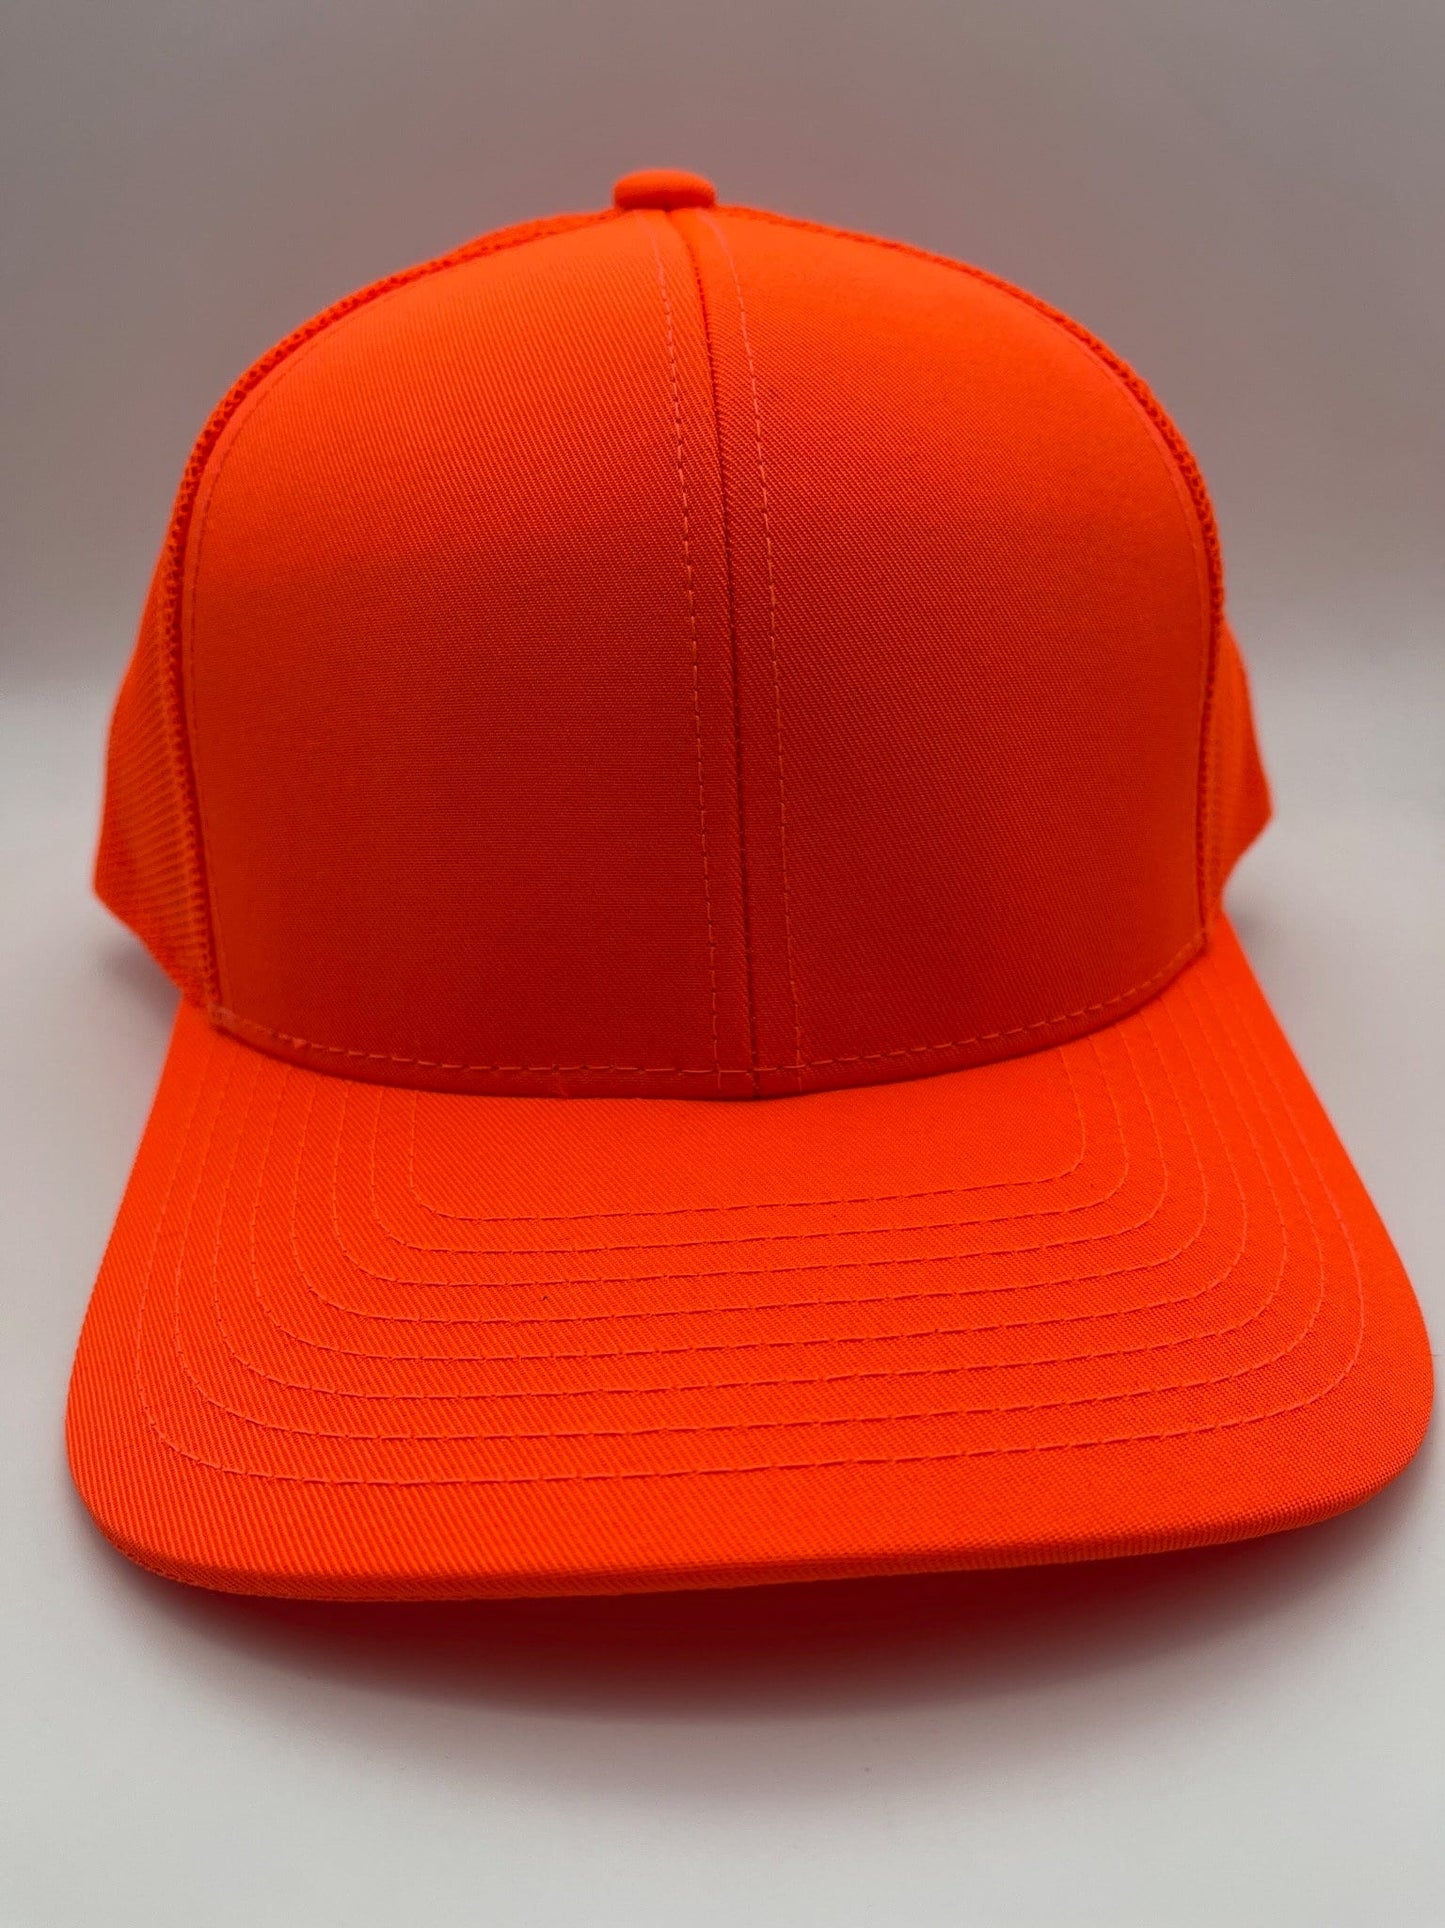 Any State Quail Hunter with Dog Snap Back Adjustable Hat in Multiple Hat Color Options